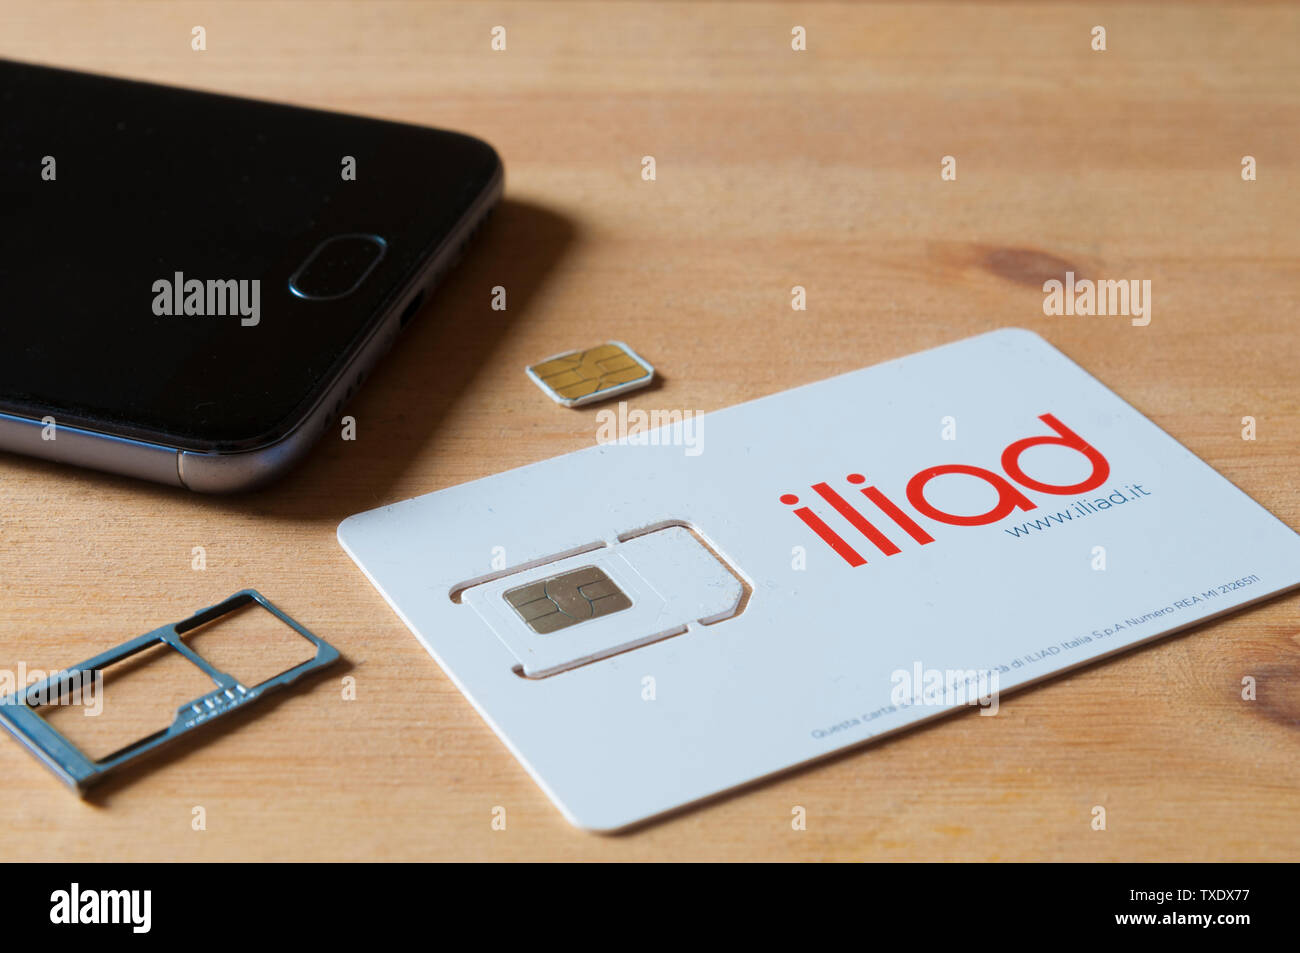 CARRARA, ITALY - JUNE 25, 2019 - A sim card of the French operator Iliad, recently active in Italy ready to be inserted into a smartphone Stock Photo